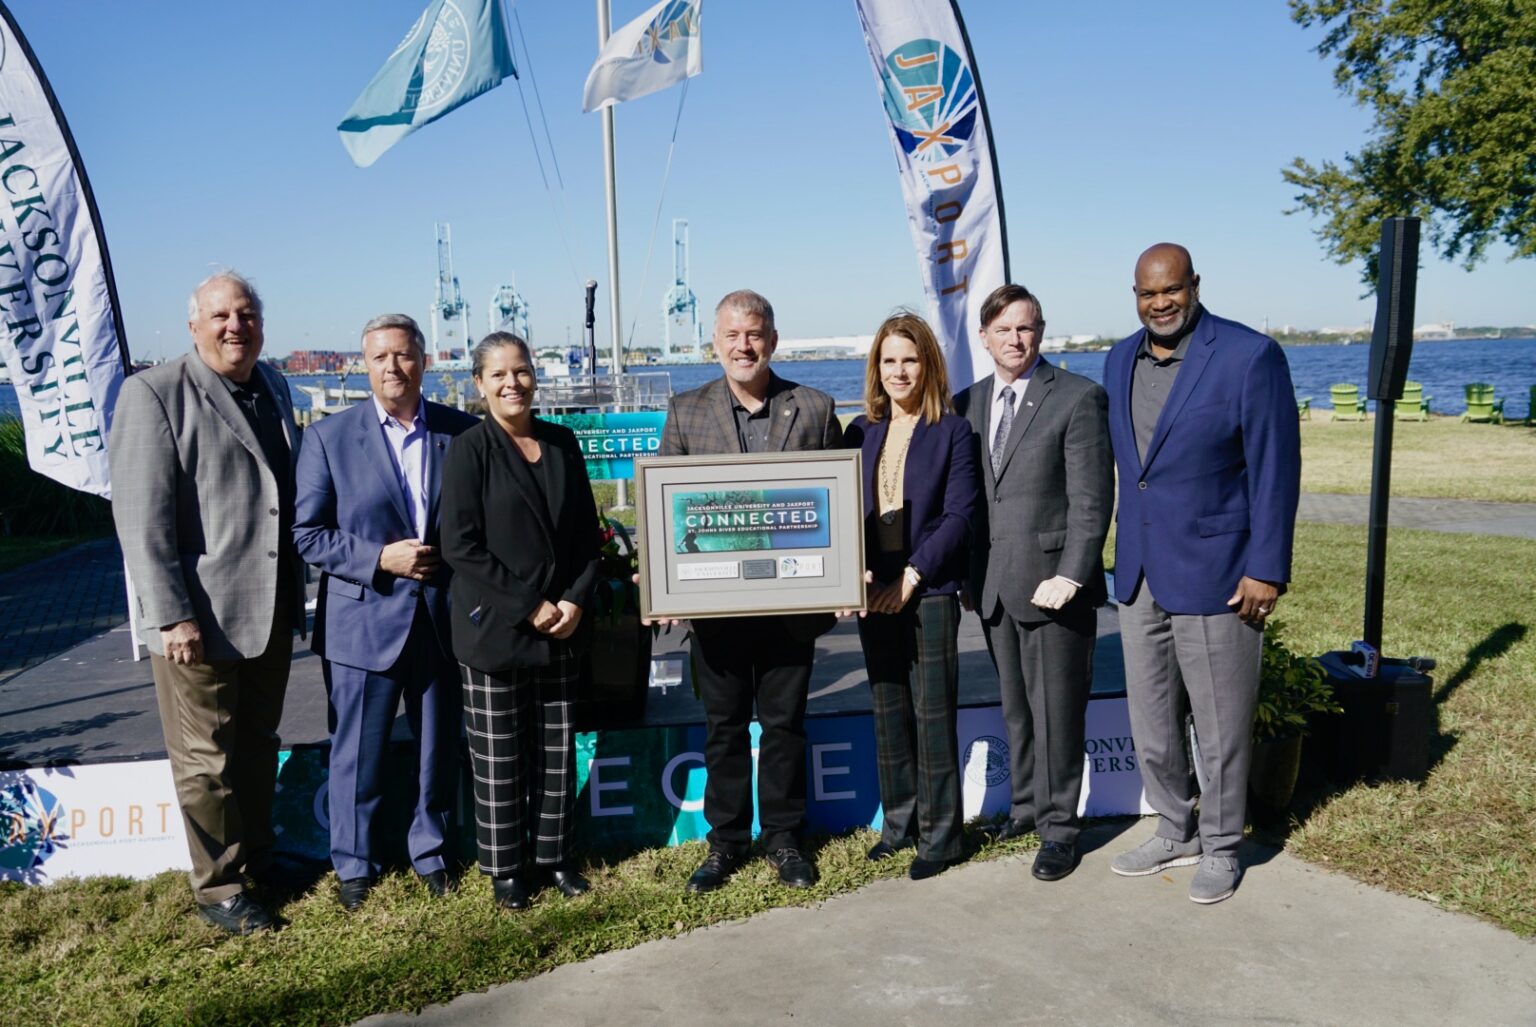 Several of the JAXPORT and JU executives at the launch of Connected, posed in front of the St. Johns River